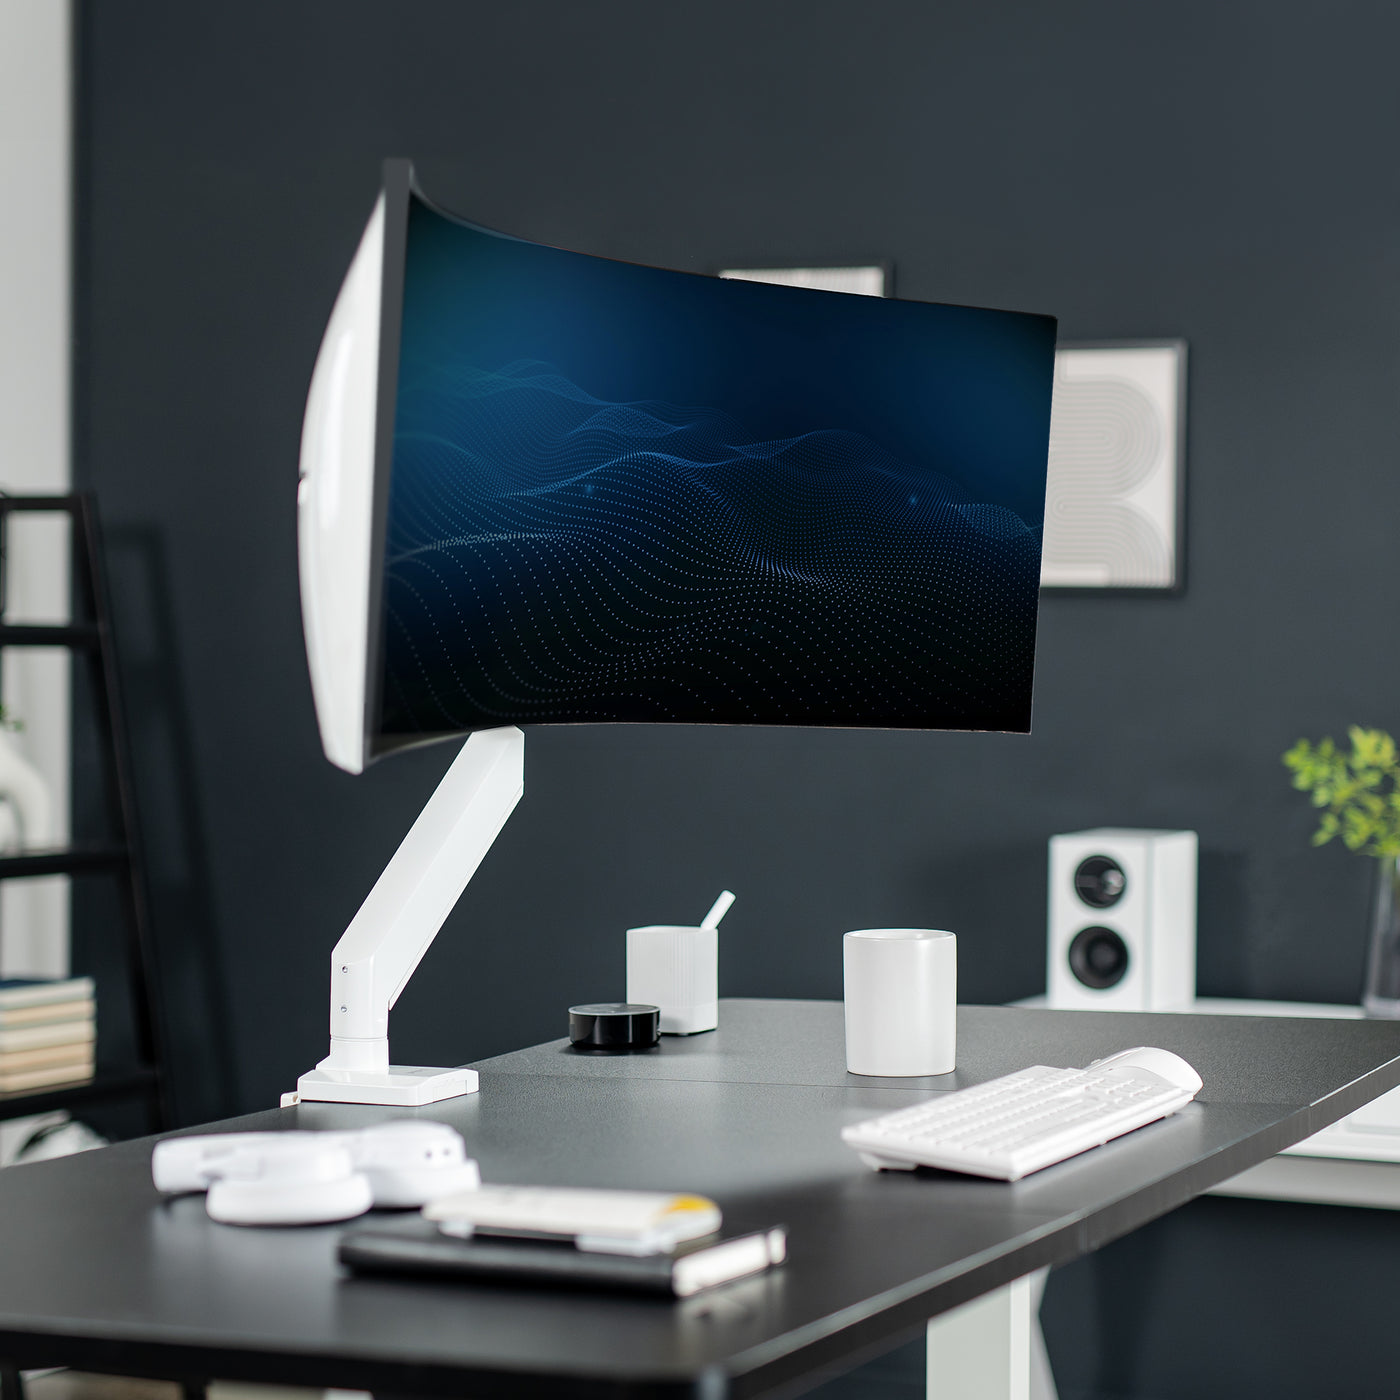 Sturdy arm clamped onto a desk supporting a curved monitor in an aesthetic office.